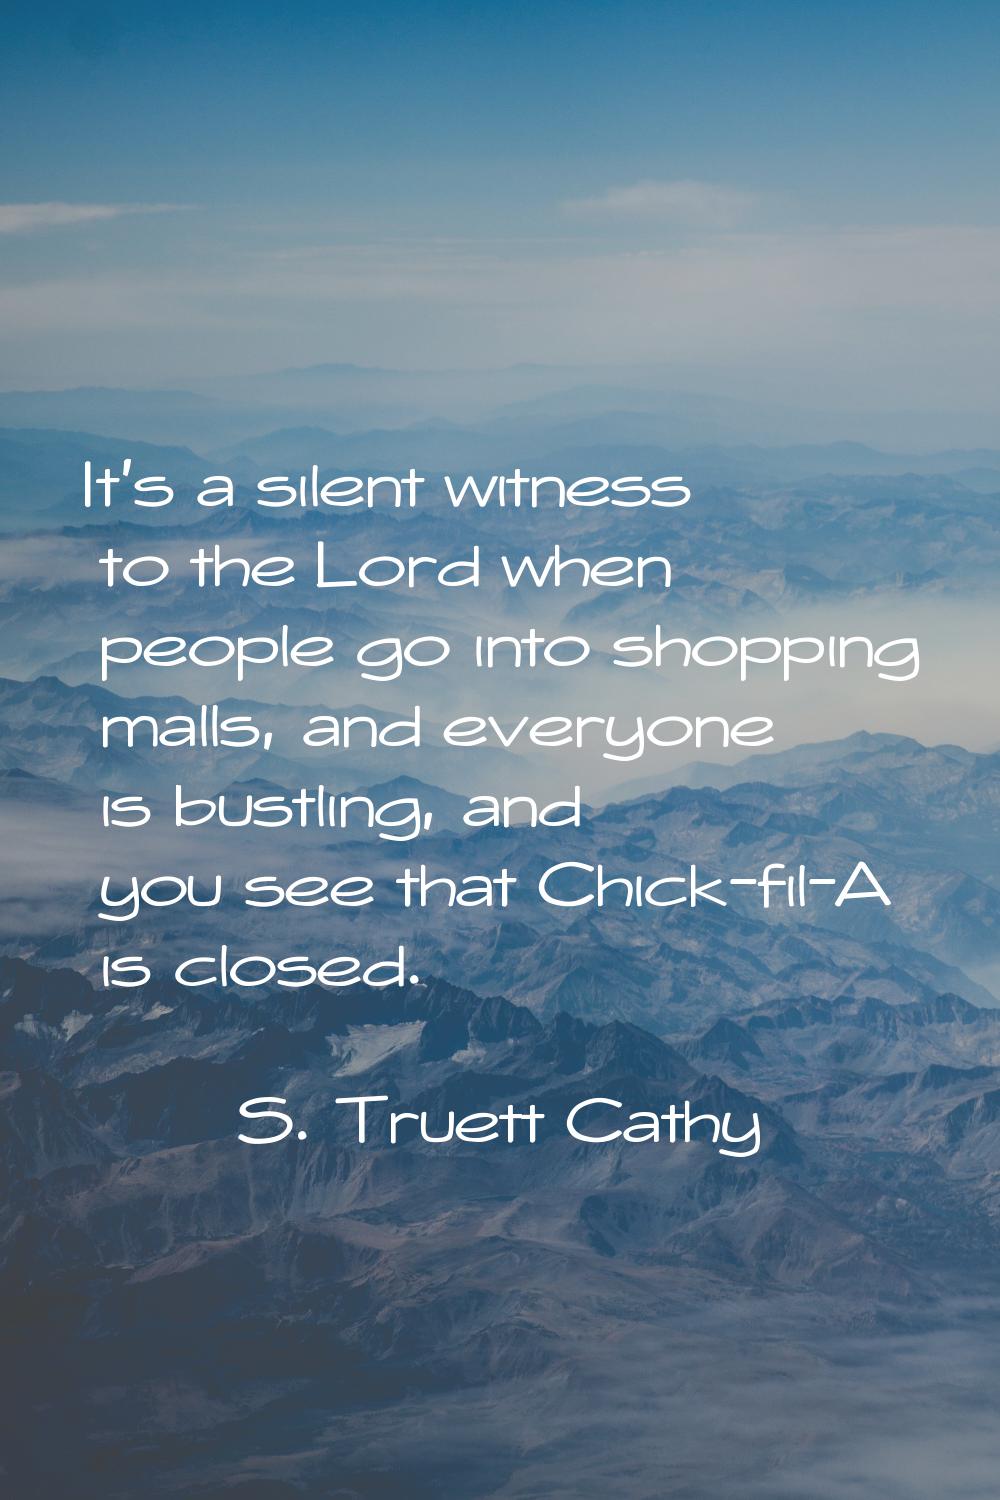 It's a silent witness to the Lord when people go into shopping malls, and everyone is bustling, and